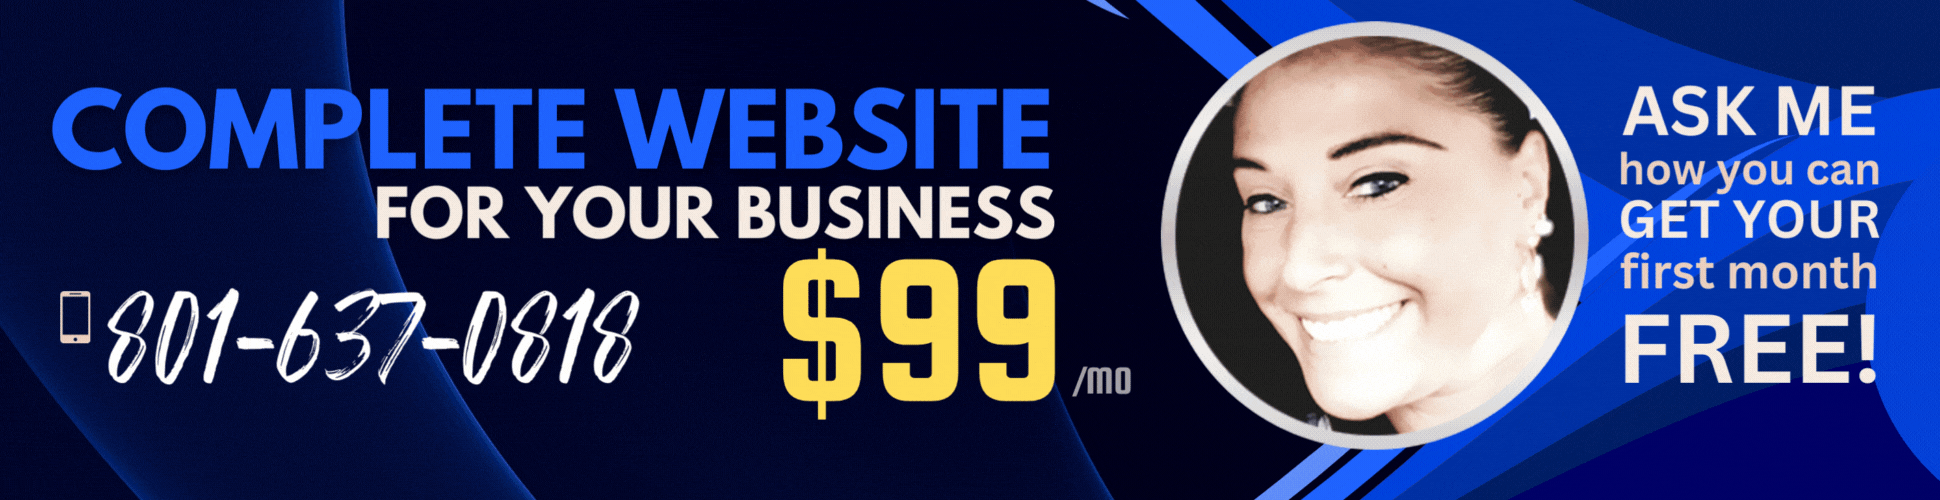 Complete Website - Just $99/mo